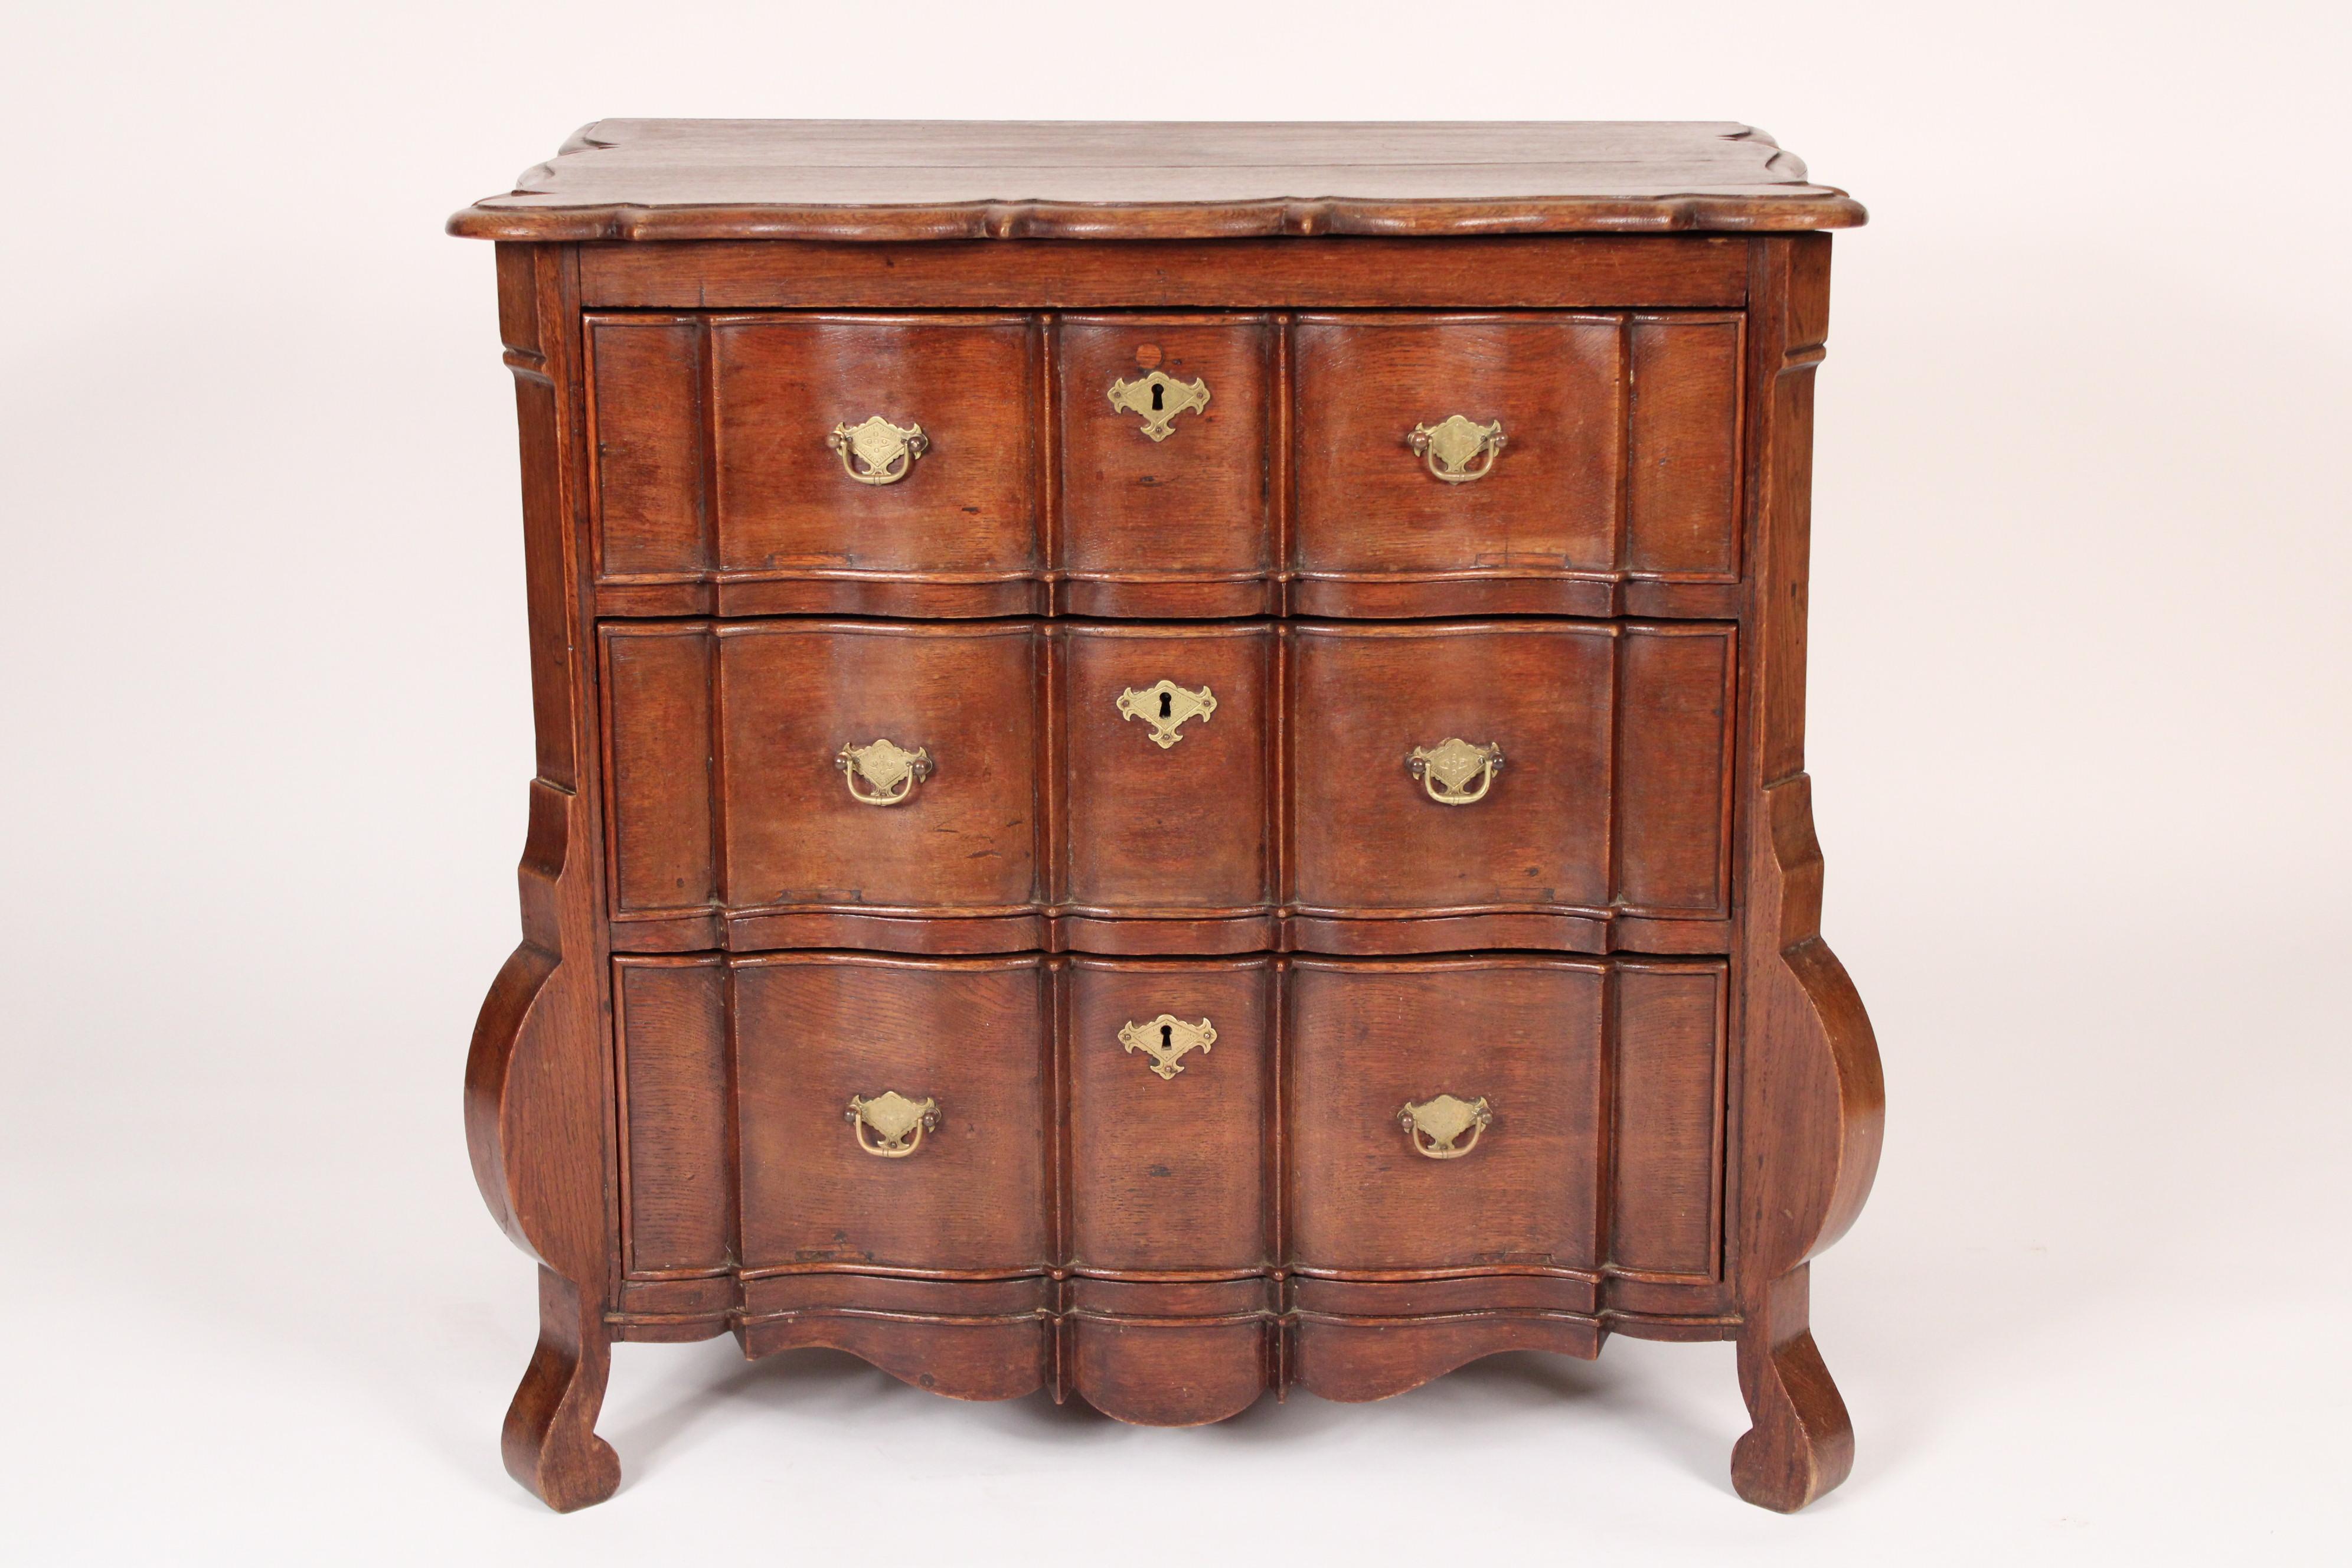 Antique baroque style oak chest of drawers, 19th century. With an overhanging scalloped edge top, three shaped drawers with brass hardware, on scroll shaped feet.